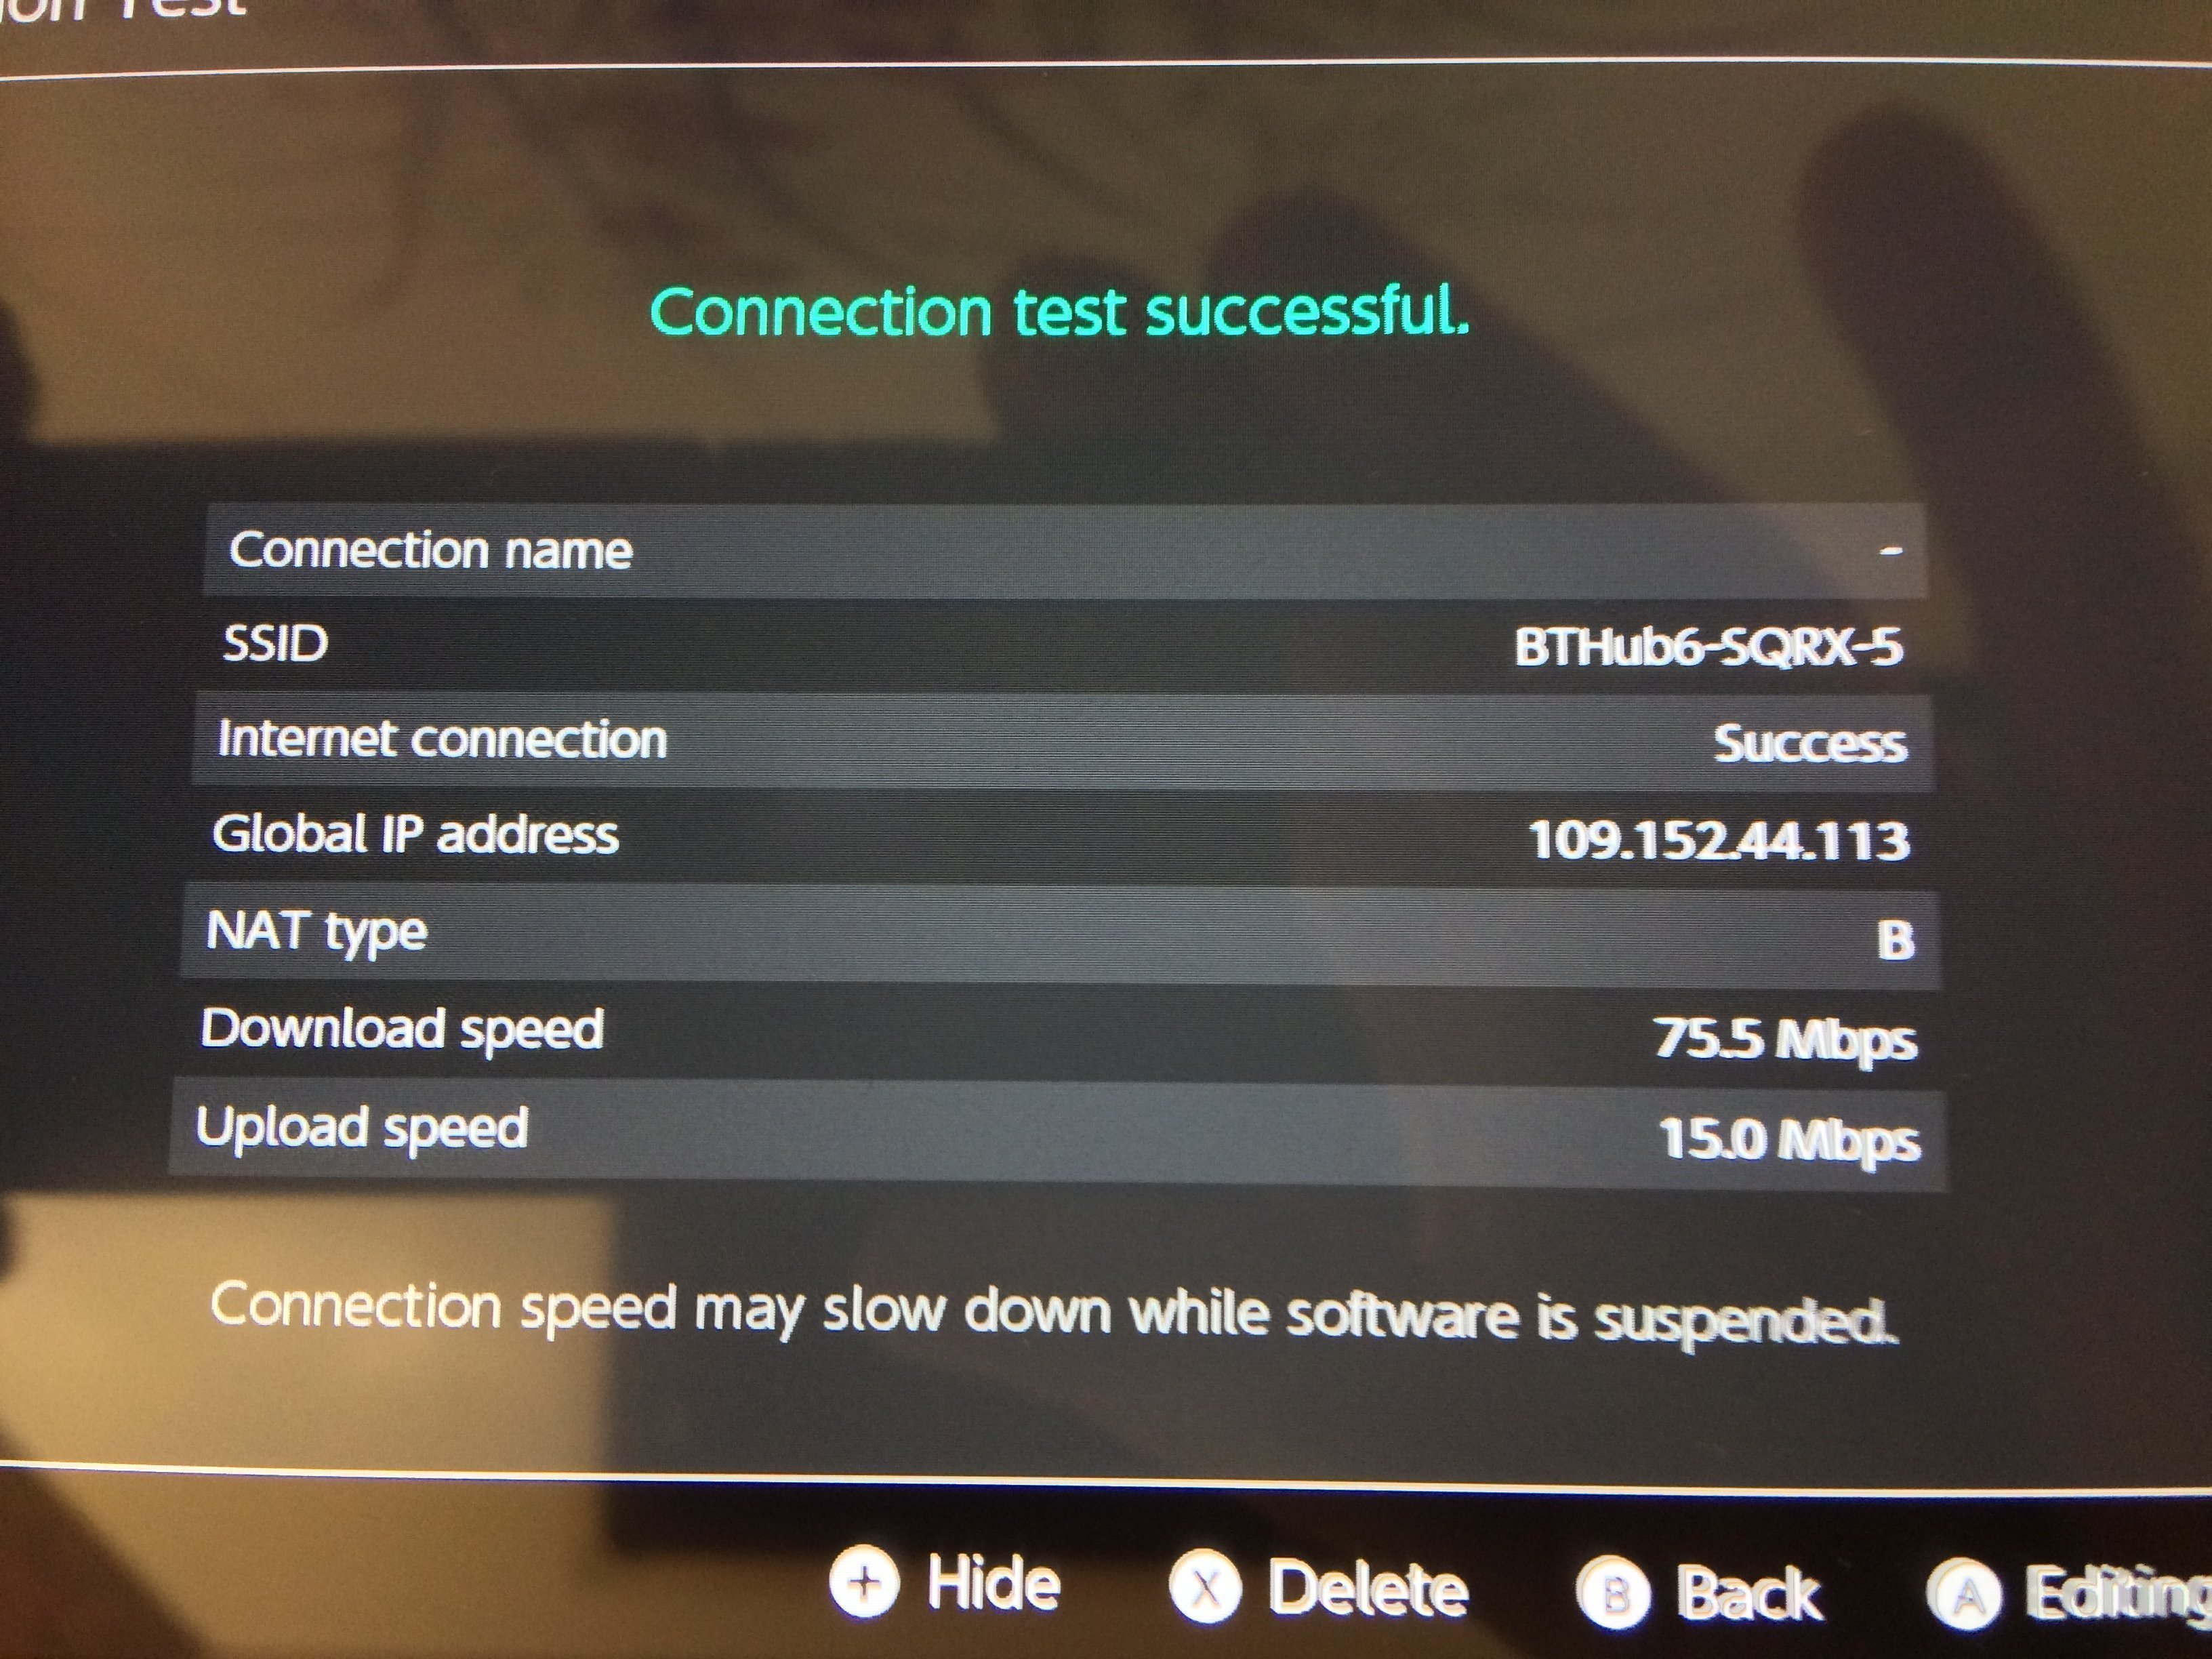 gå på pension køber katastrofe What maximum speeds can you achieve WiFi using your Nintendo Switch running  Test Connection? | GBAtemp.net - The Independent Video Game Community